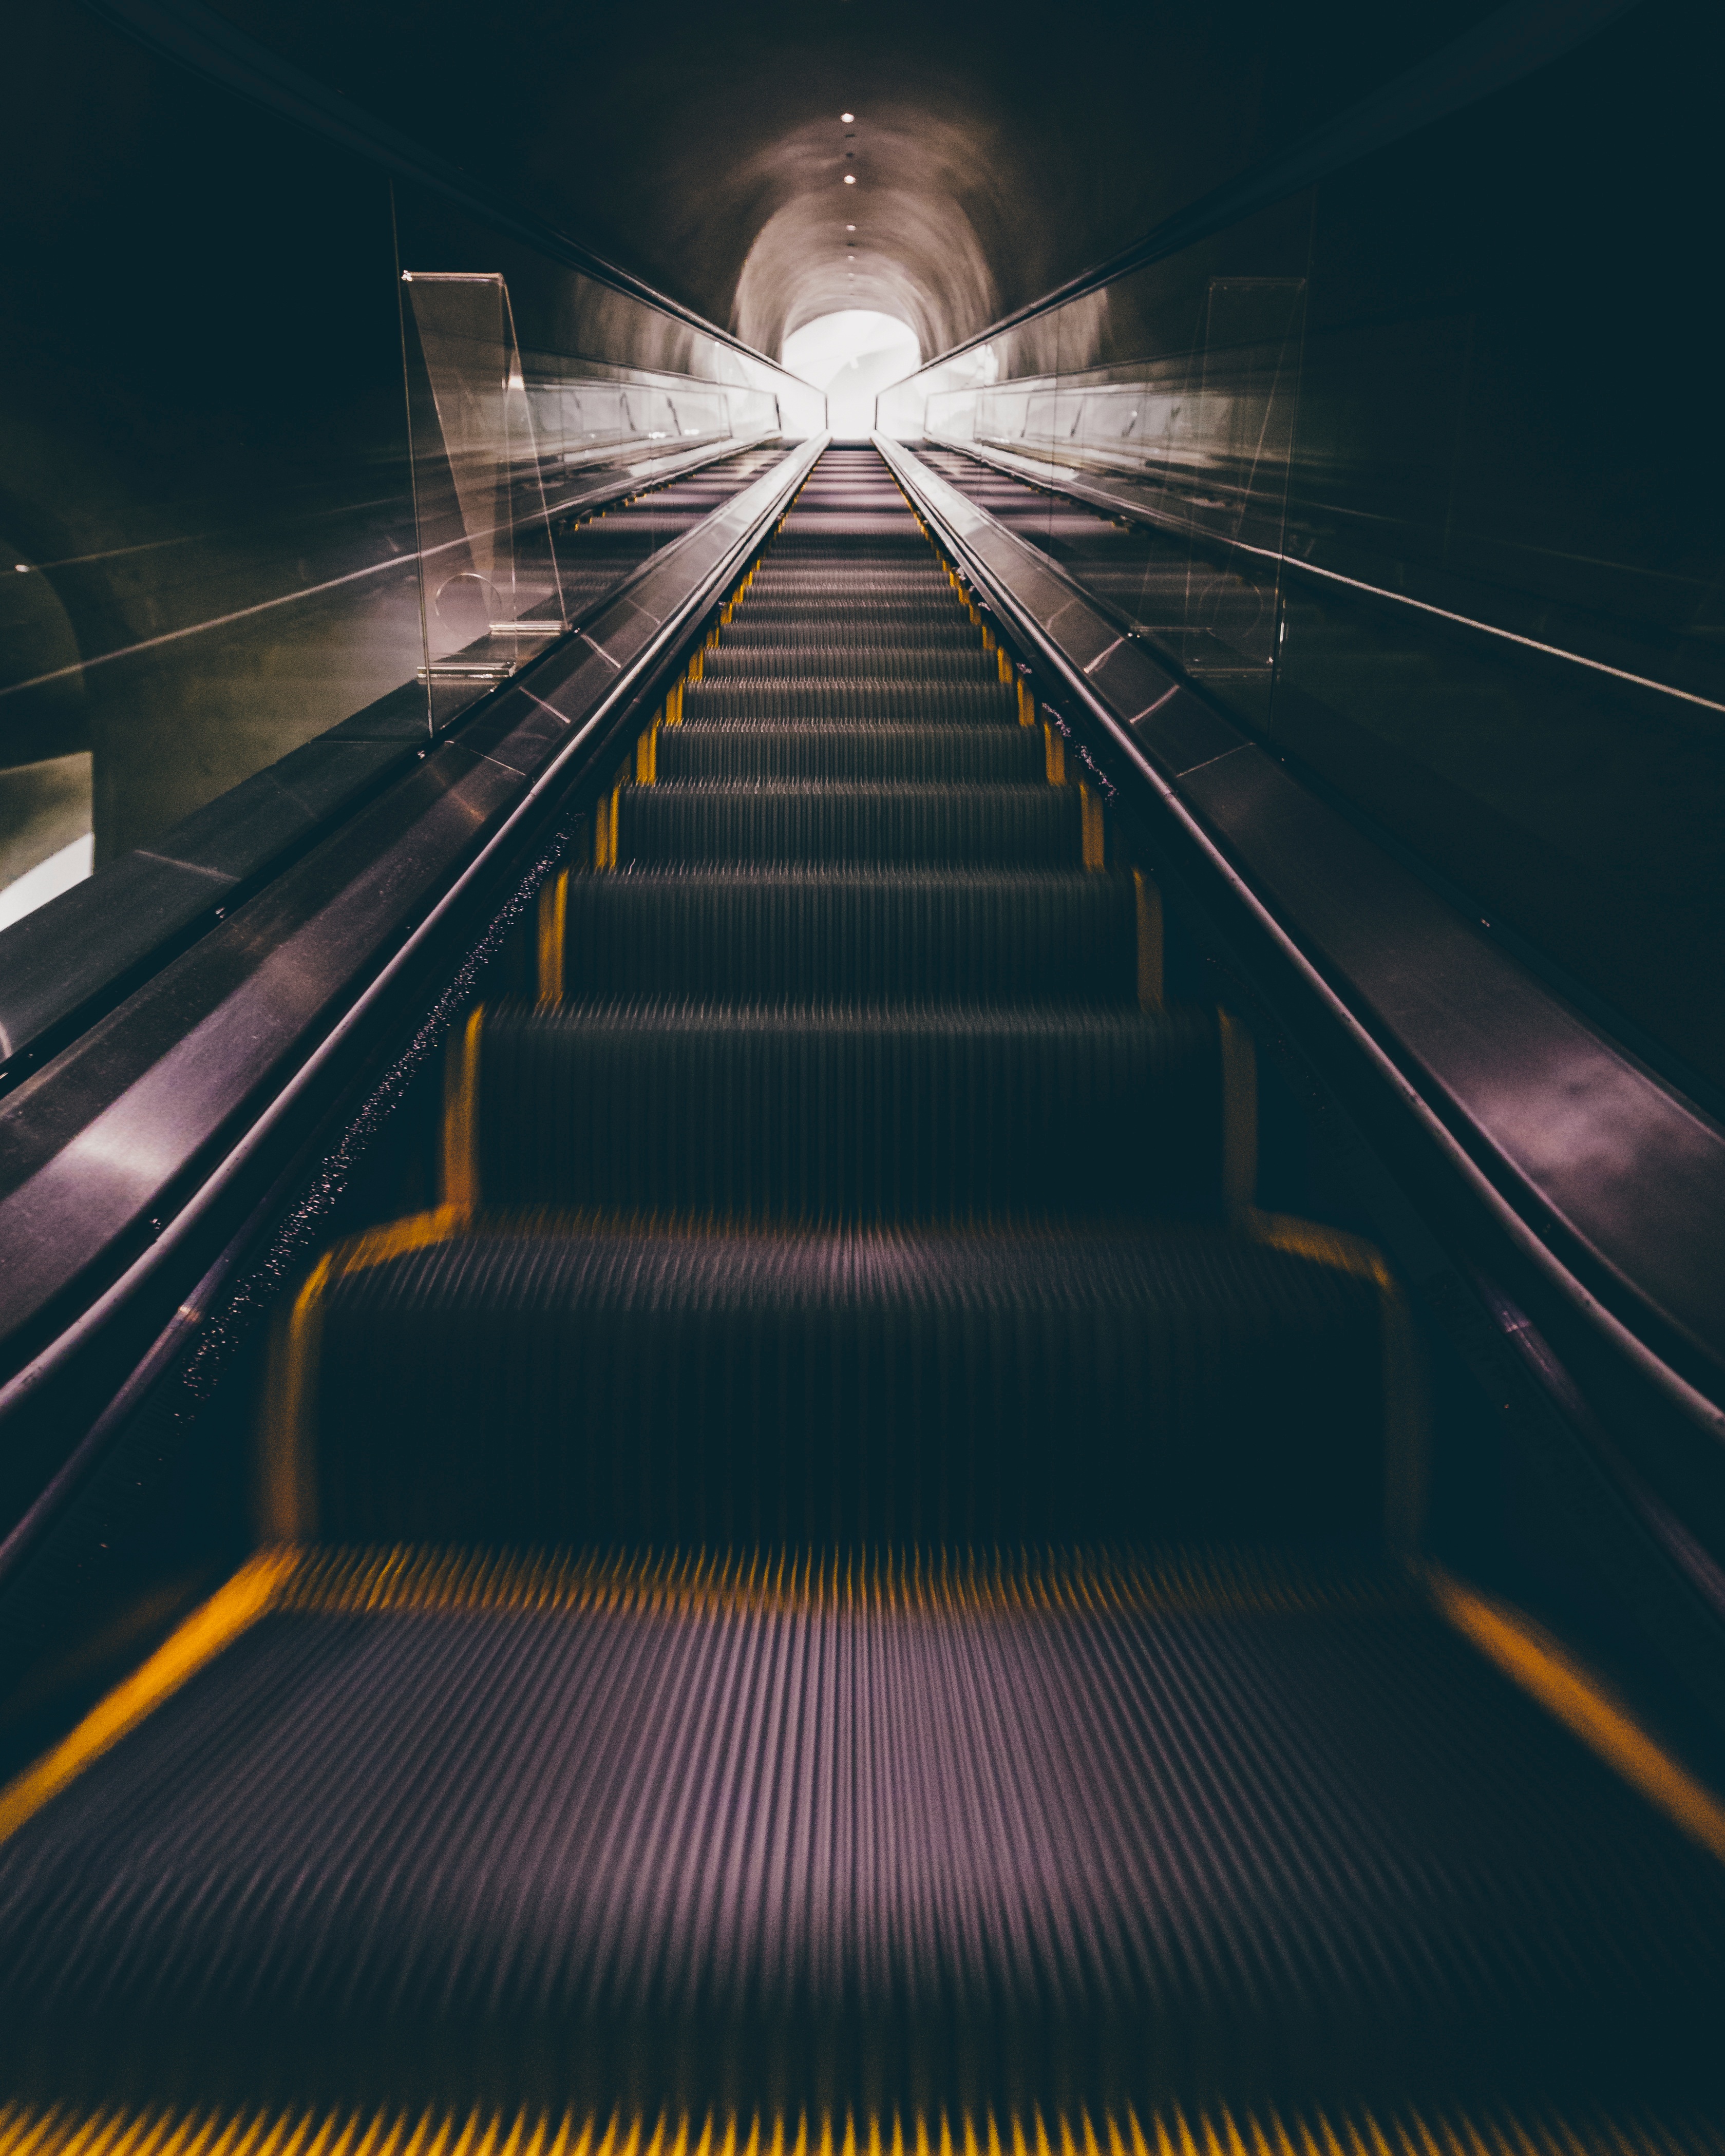 63170 Screensavers and Wallpapers Stairs for phone. Download miscellanea, miscellaneous, stairs, ladder, underground, escalator pictures for free